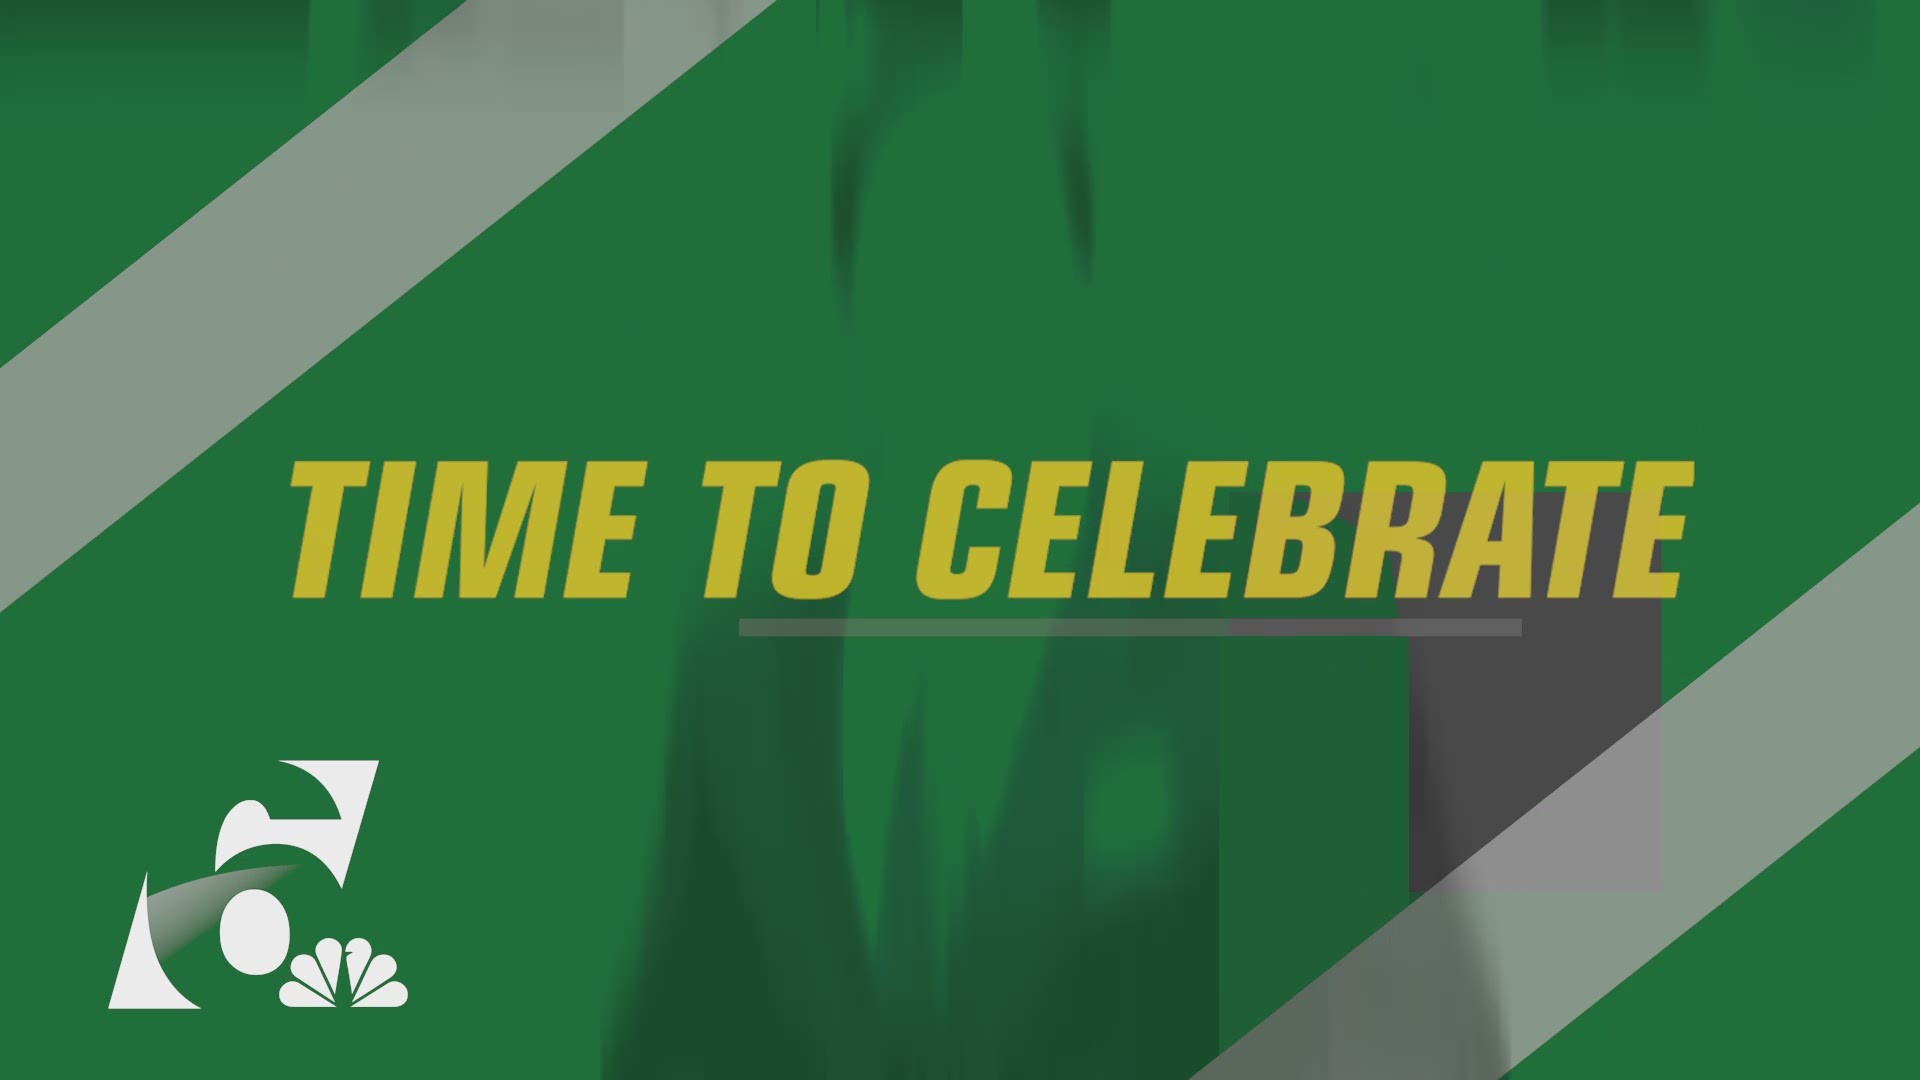 Following the Baylor Lady Bears NCAA women's championship, Kalani Brown and Chloe Jackson were drafted to the WNBA and Kim Mulkey was presented with a Corvette. Their celebration isn't slowing down. Stick with 6 for the Parade of Champions on-air, online, and on social media.